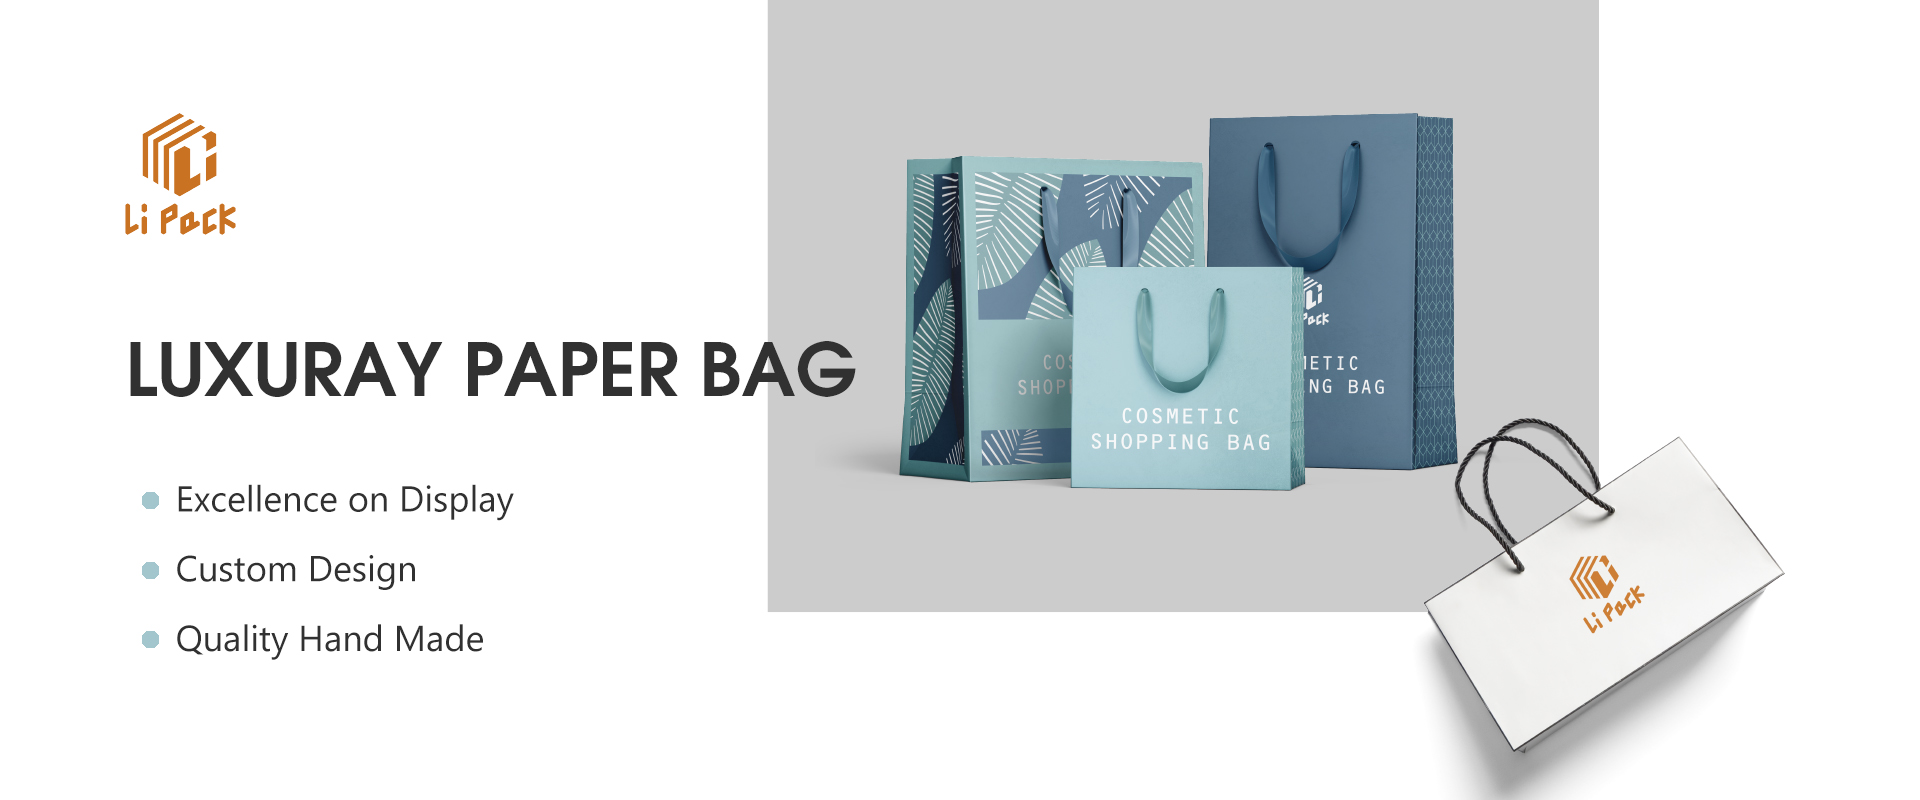 What are the advantages of boutique paper bags